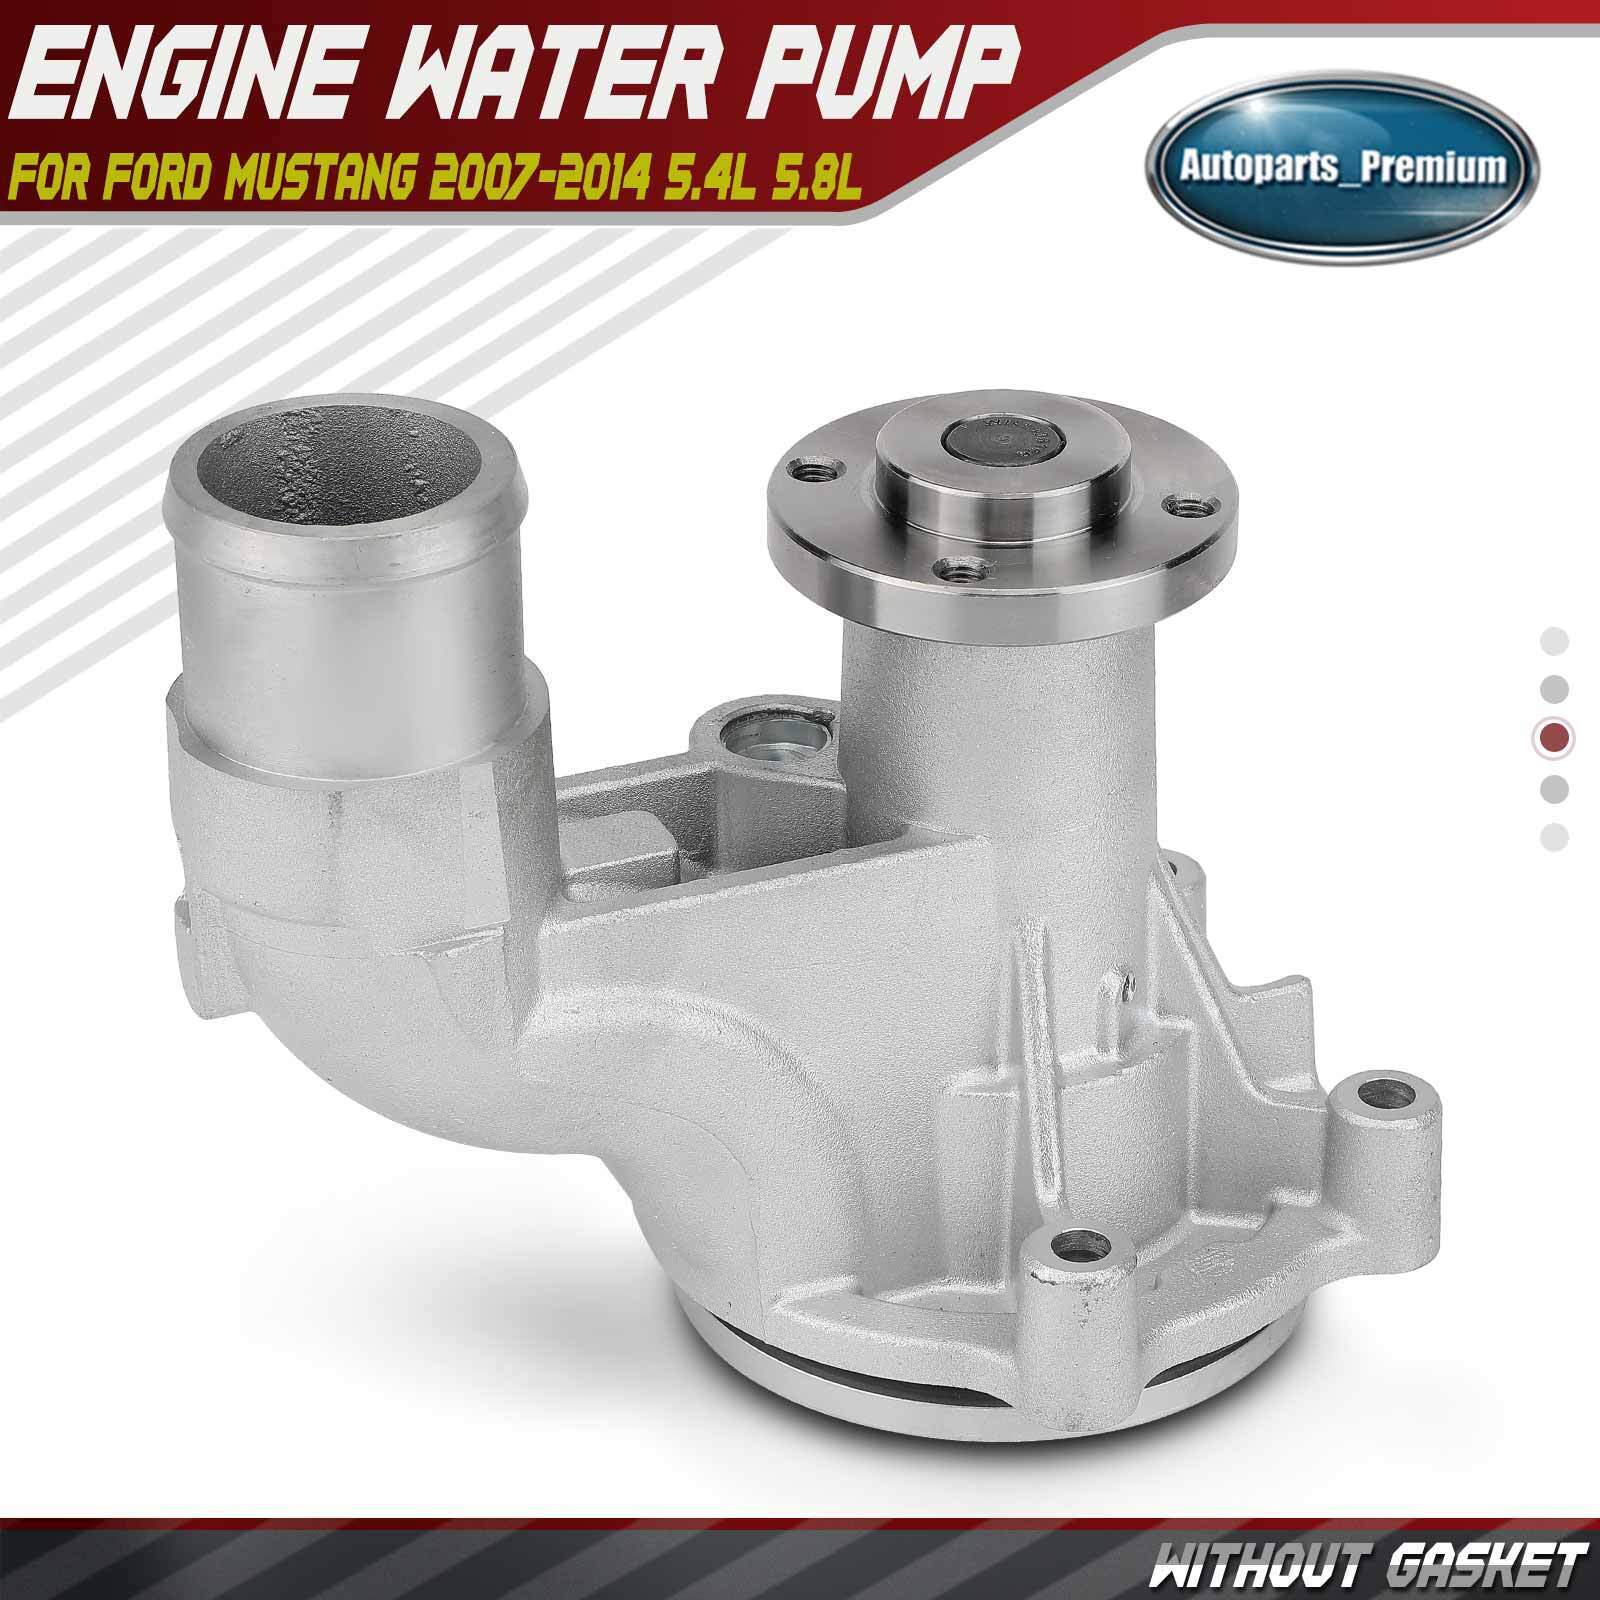 Water Pump for Ford Mustang 2007 2008 2009 2010 2011 2012 2013 2014 5.4L 5.8L